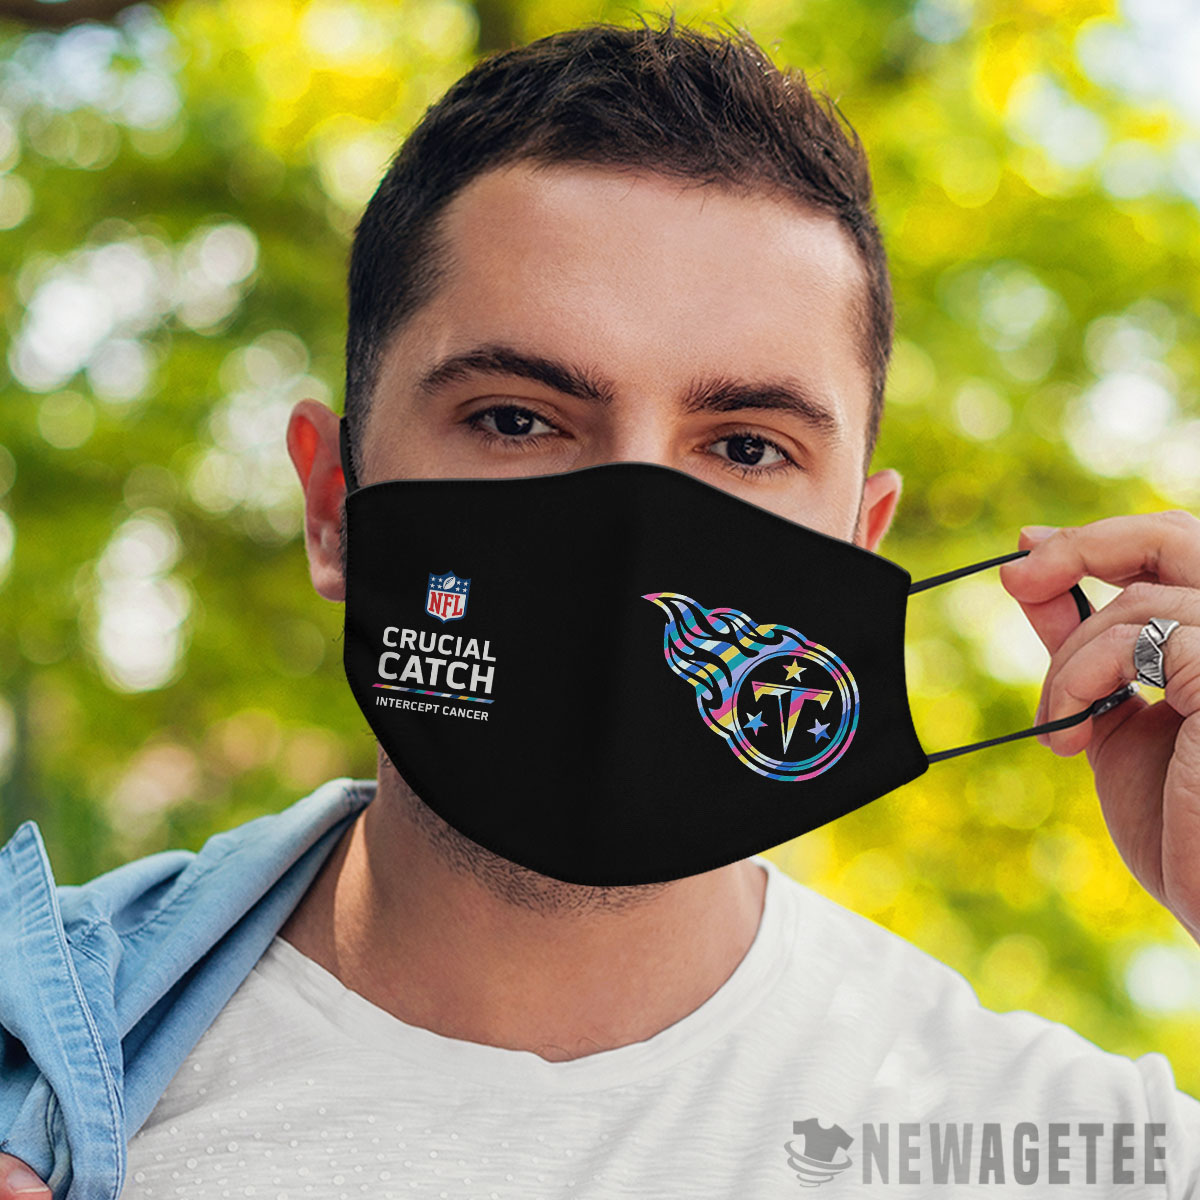 Tennessee Titans Nfl Crucial Catch Multicolor Face Mask Anti-pollution